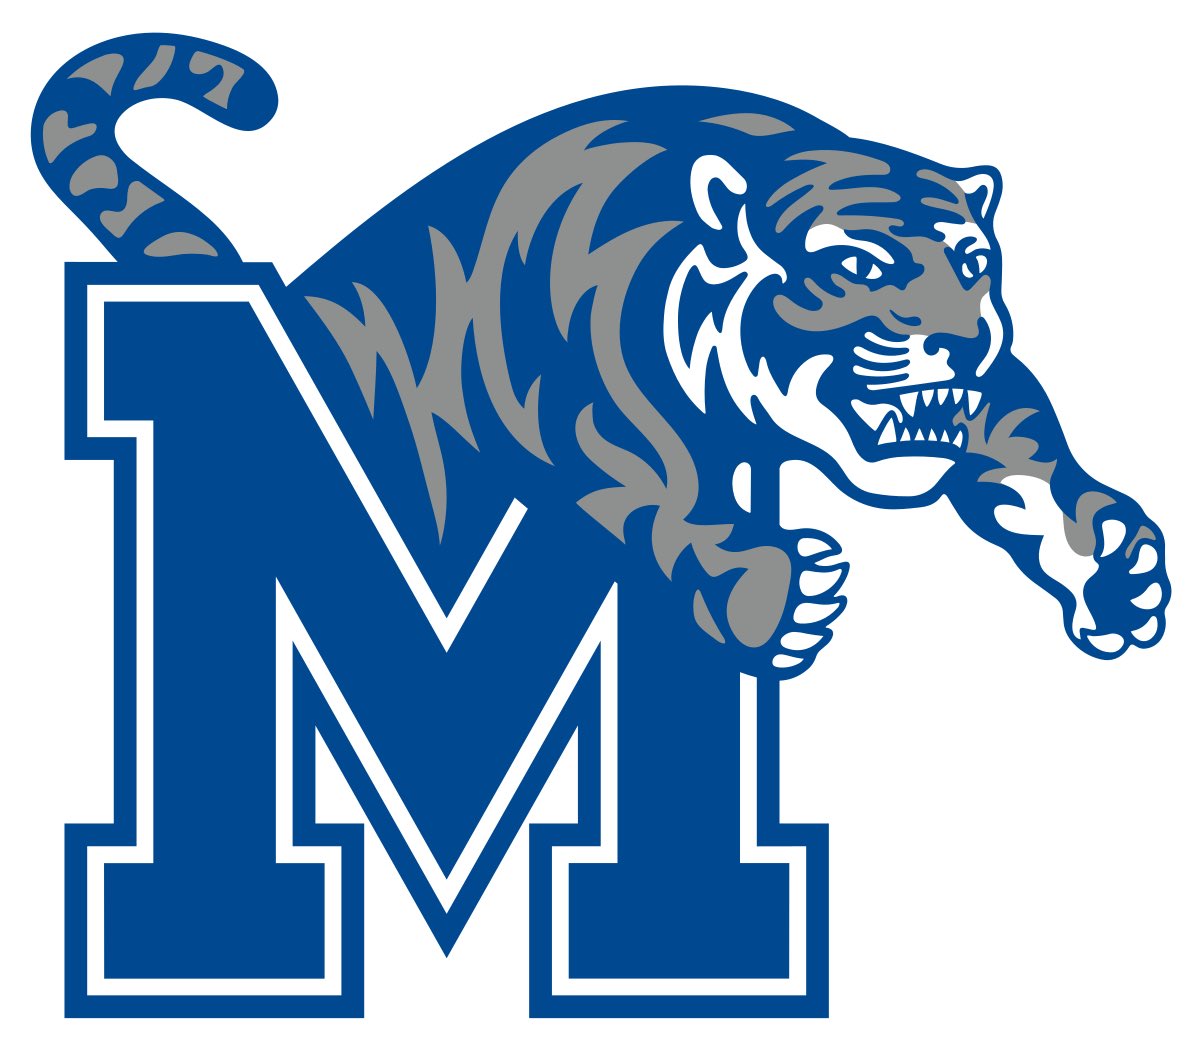 With the grace of God, & support from my teammates and coaches I’m excited to announce I have received an offer from the University of Memphis!! @CoachJT1515 @MikeHaynes81 @PaladinsFCS @FCS_Recruiting @MemphisFB @Coach_Smith10